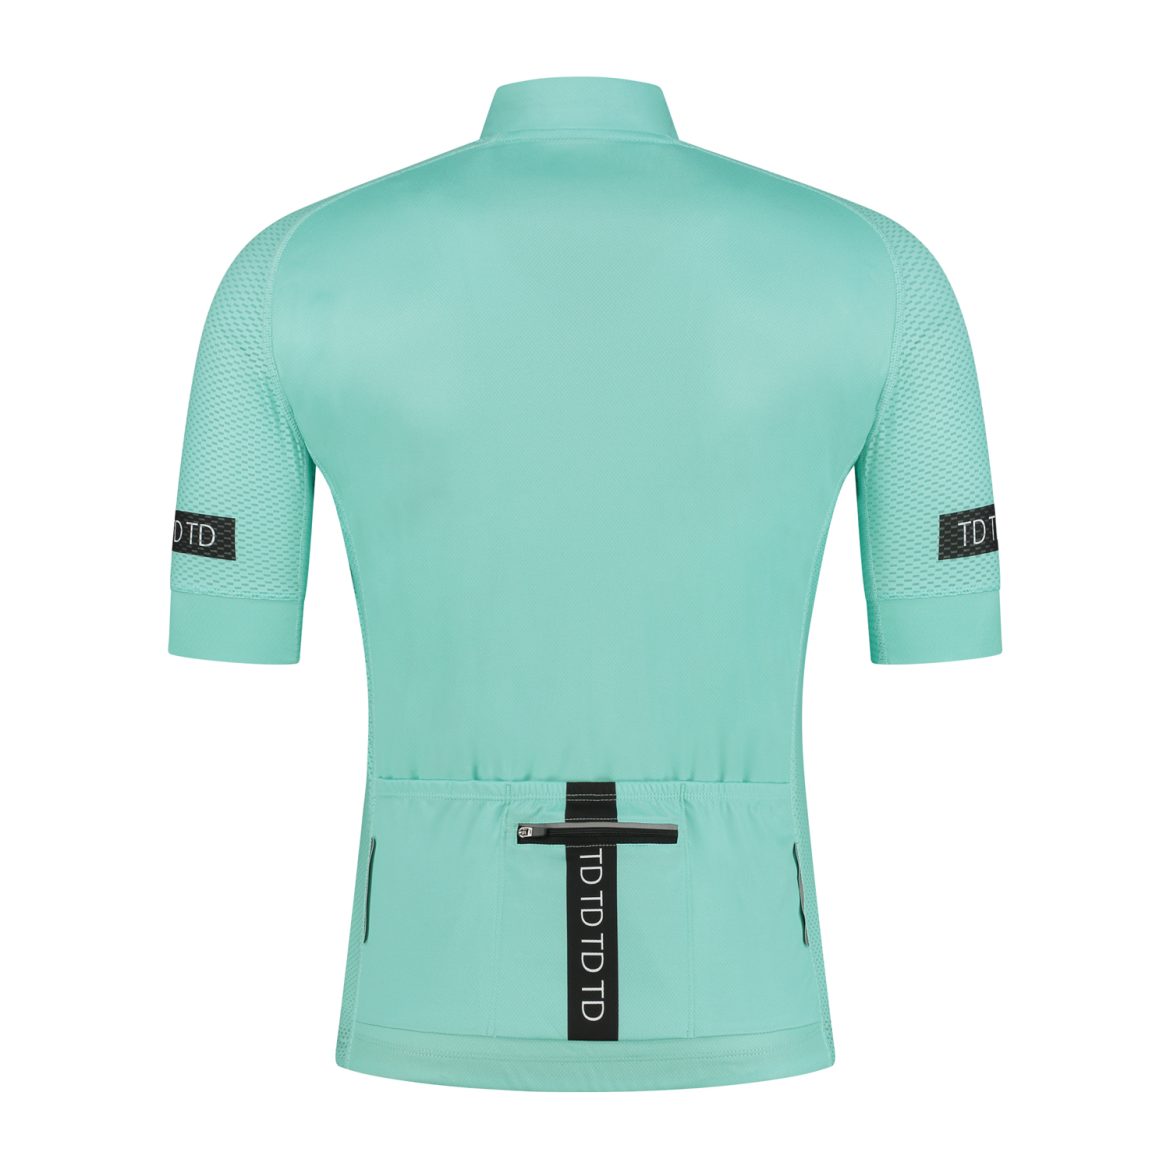 Backside celeste shirt for men cycling with short sleeve from TD